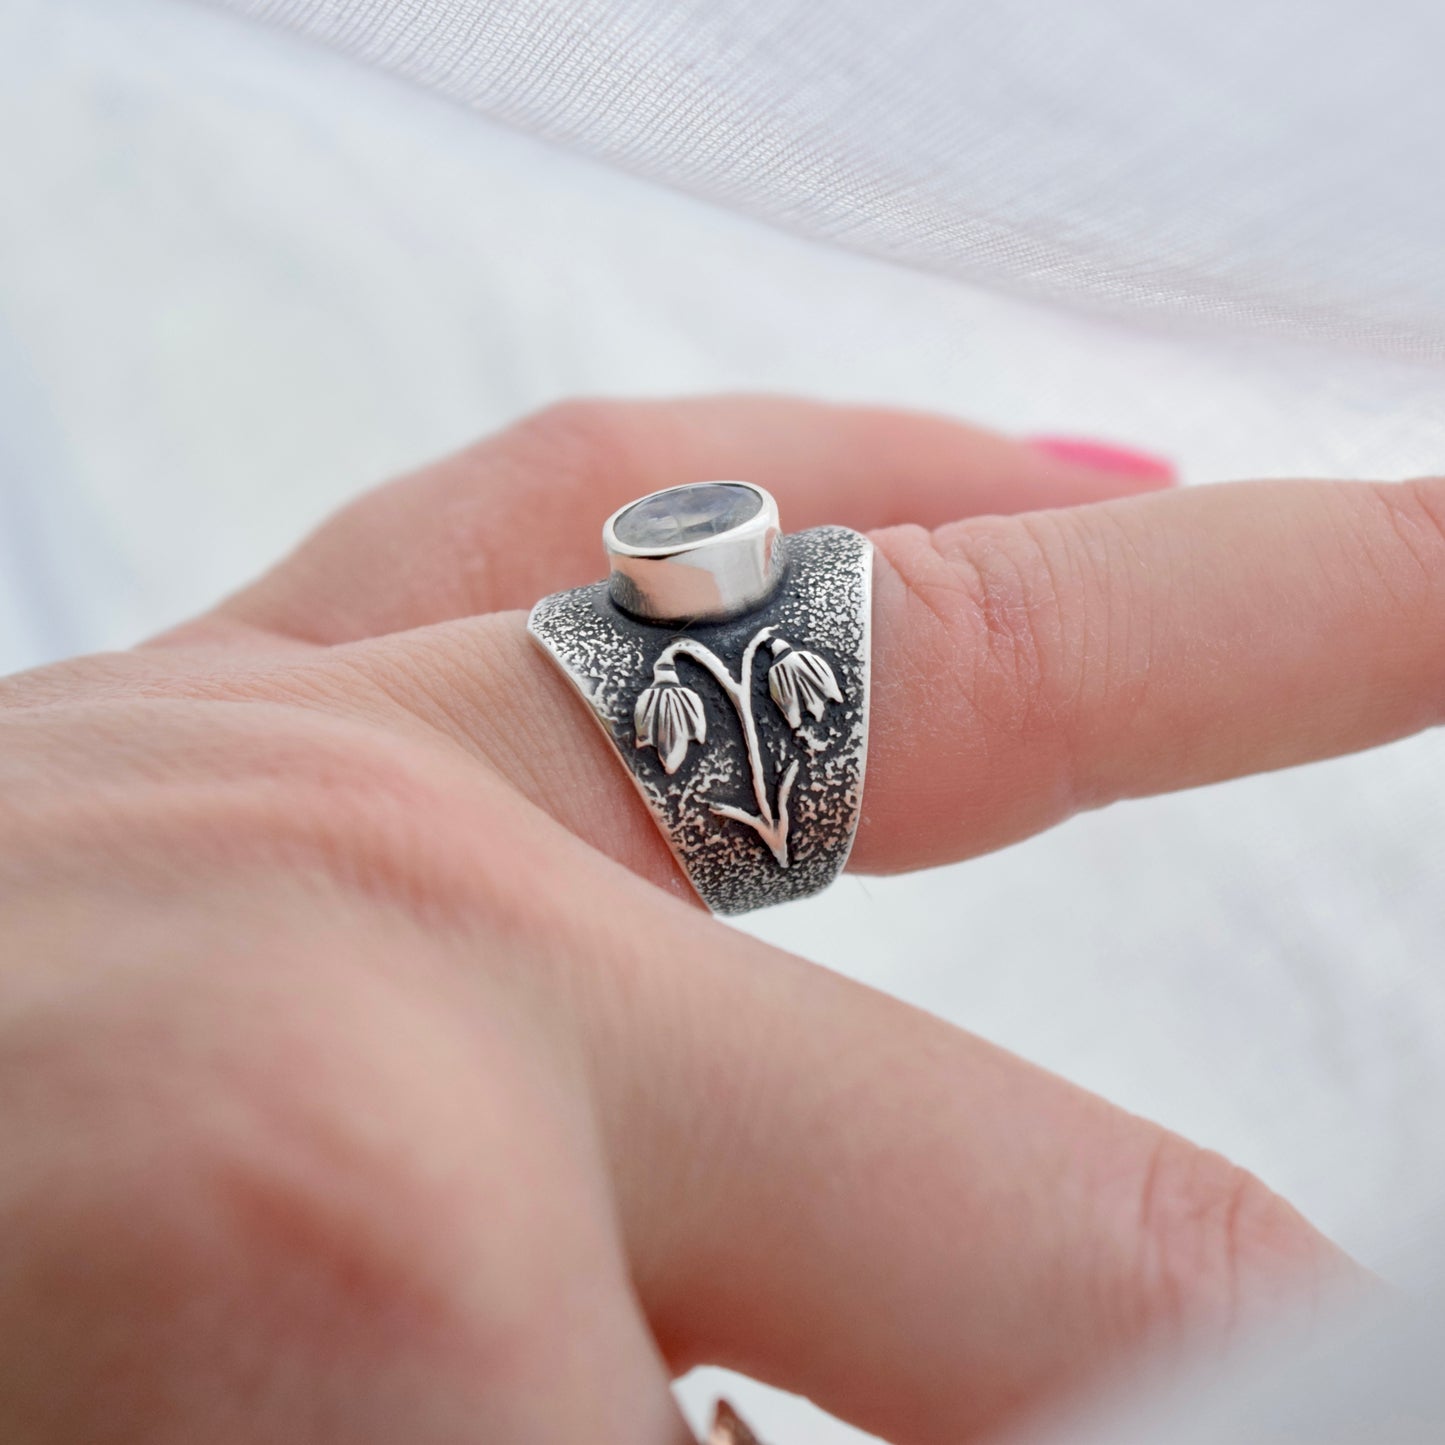 Snowdrop Shield Ring with Rainbow Moonstone size 5